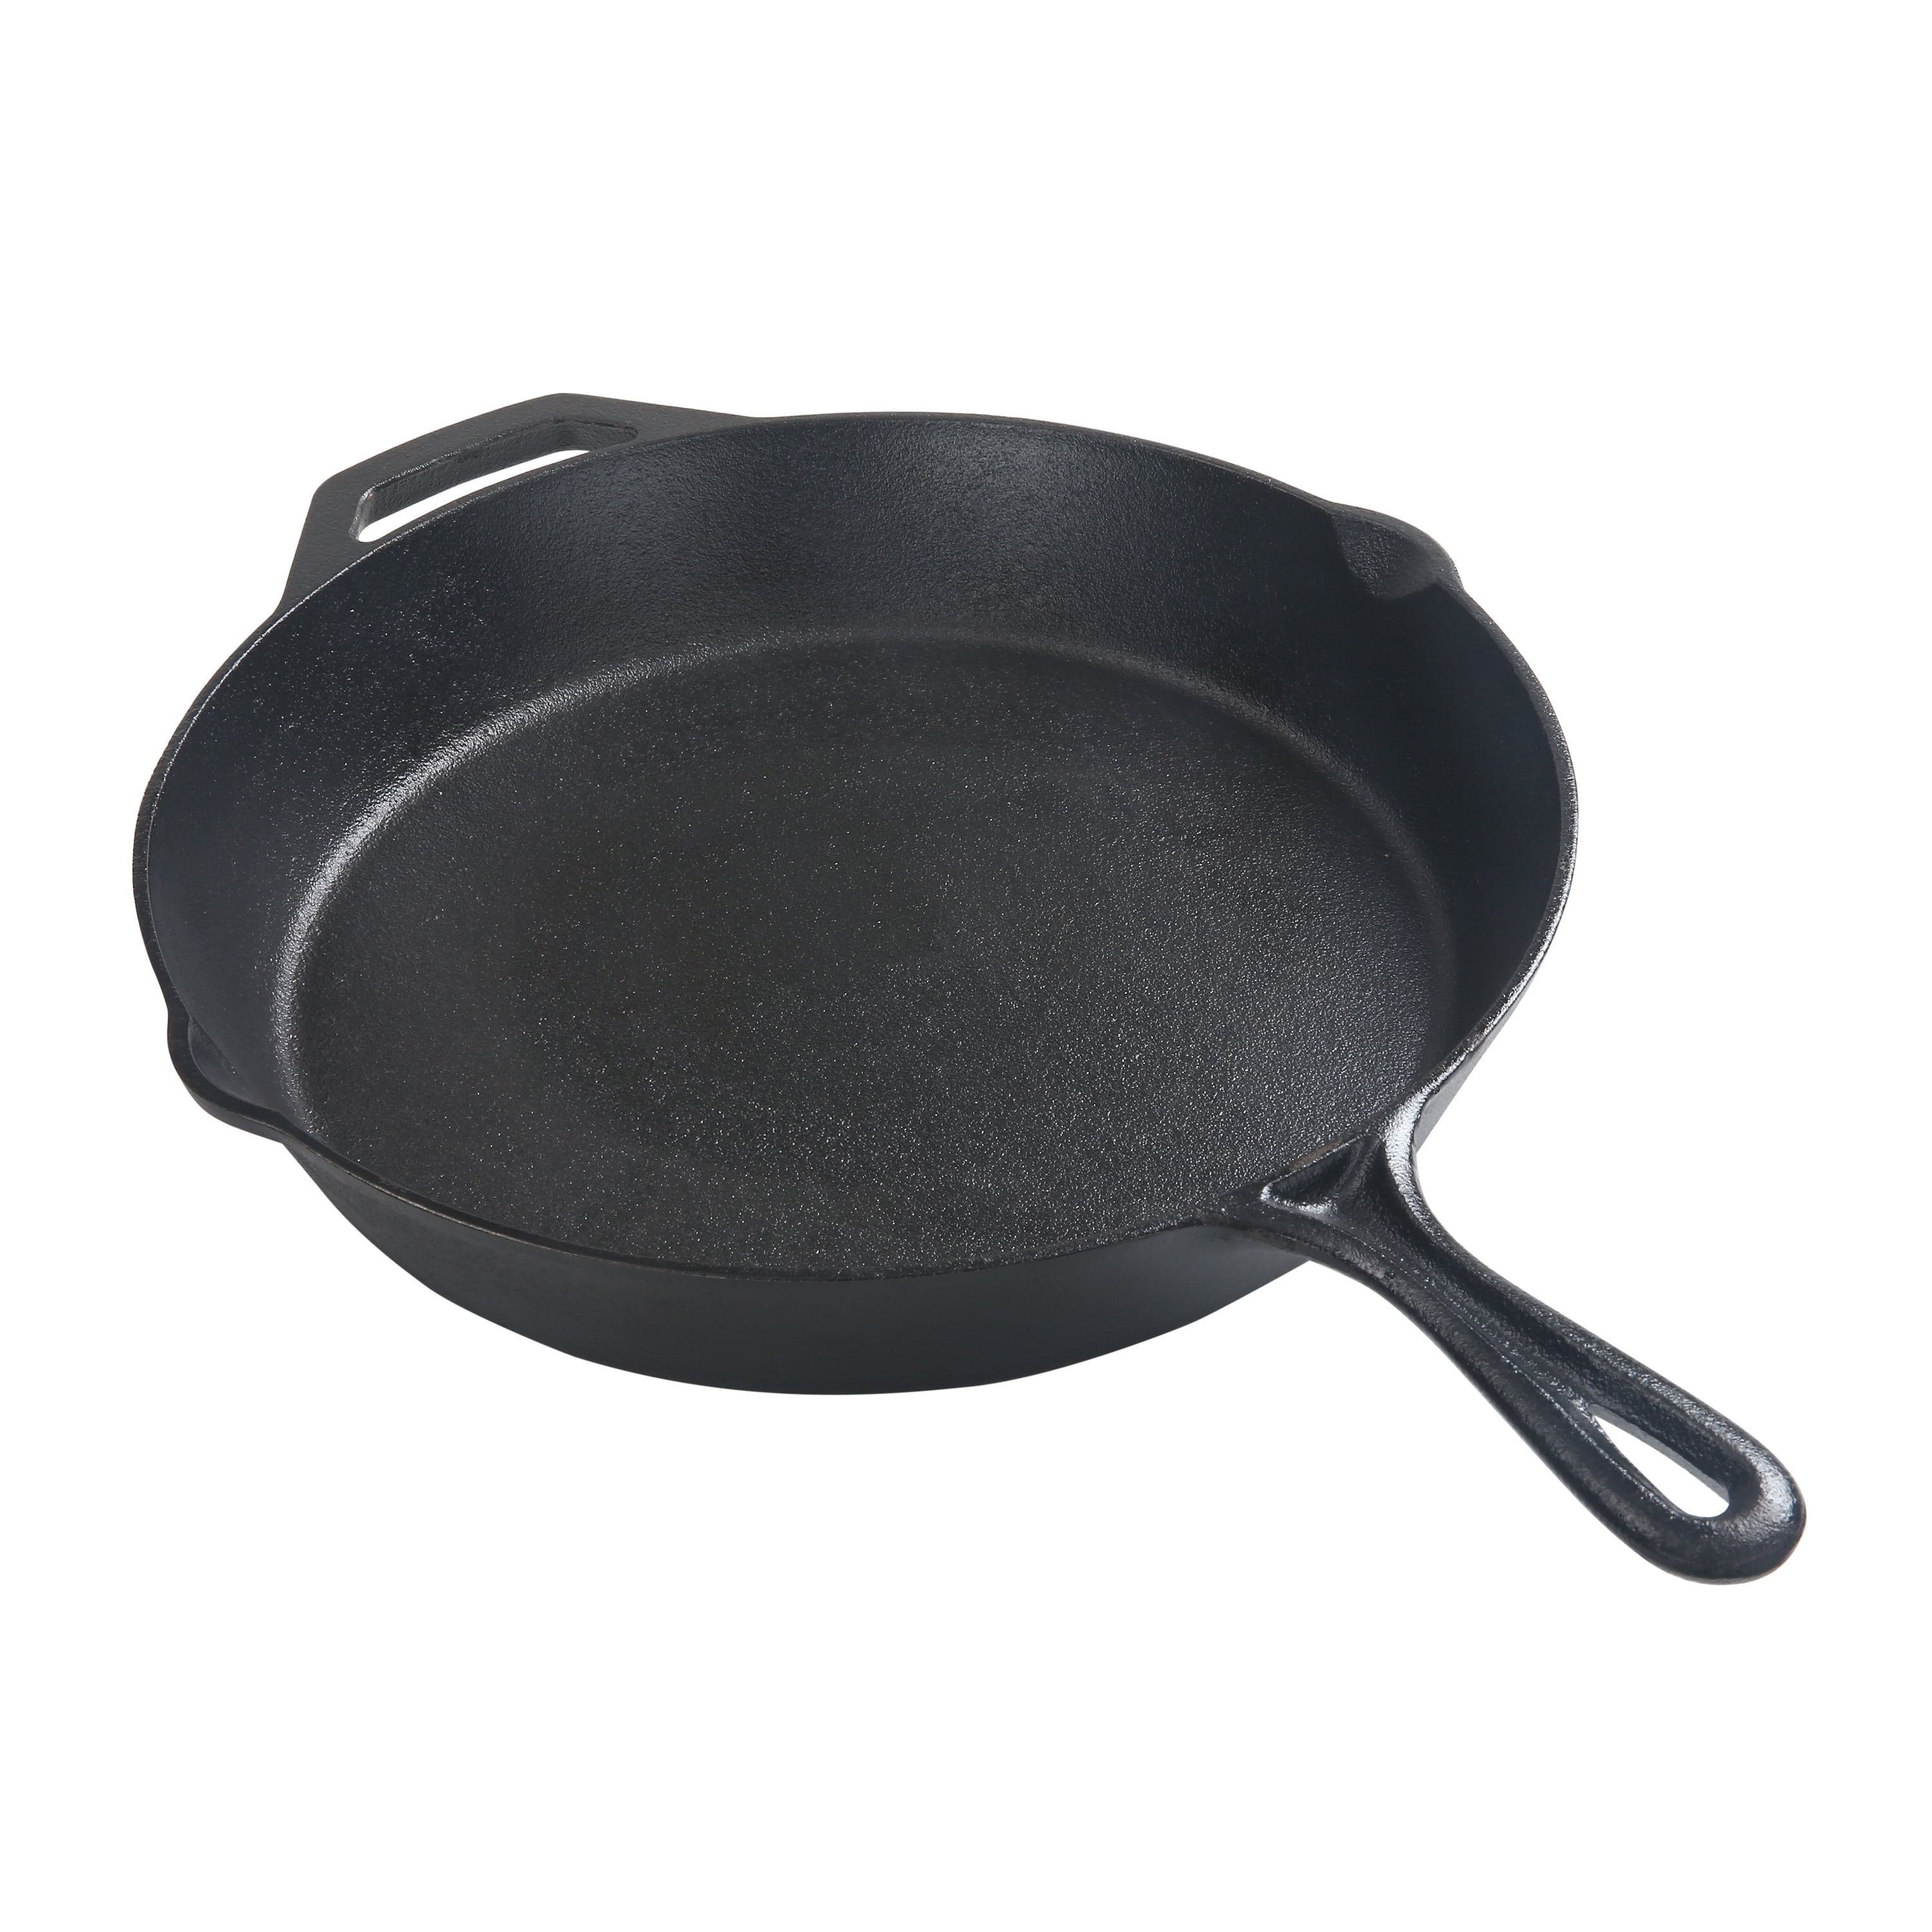 Mueller Pre-Seasoned Heavy-Duty Healthy Cast Iron Skillet 12-inch, Dual  Handles & Dual Pouring Lips, Safe across All Cooktops, Oven, BBQ, or  Campfire